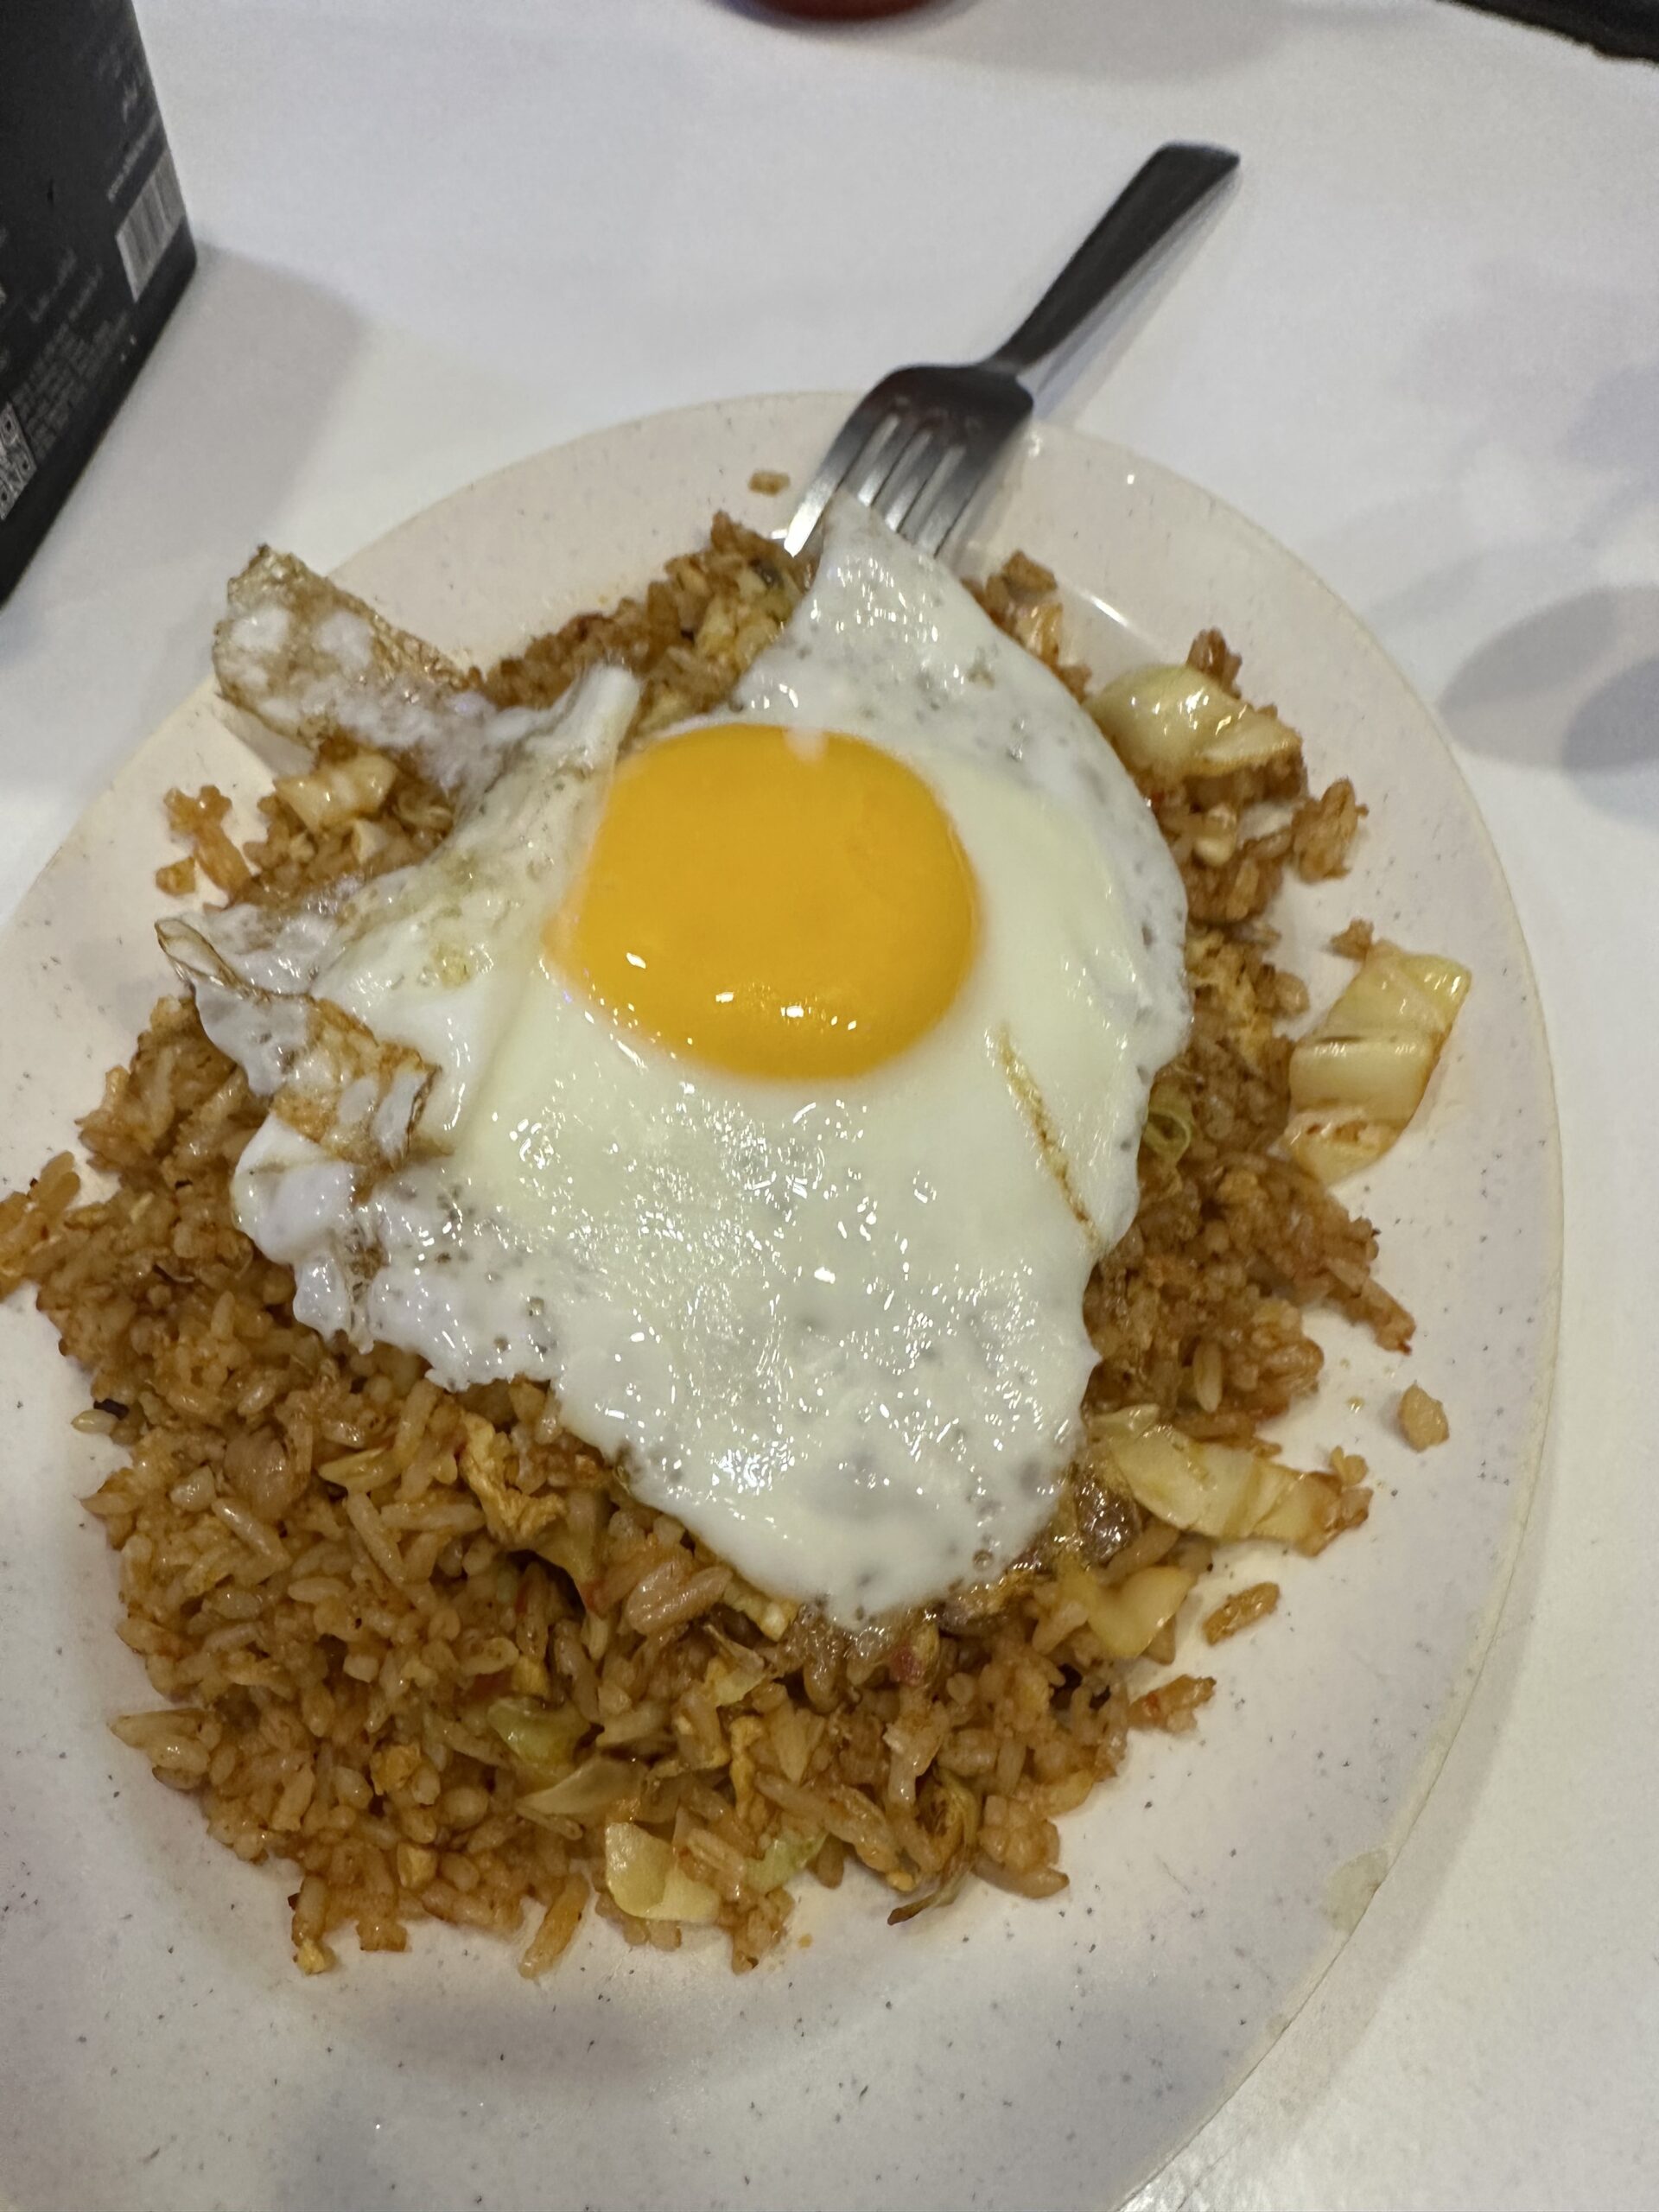 Fried rice with half cooked egg on top.